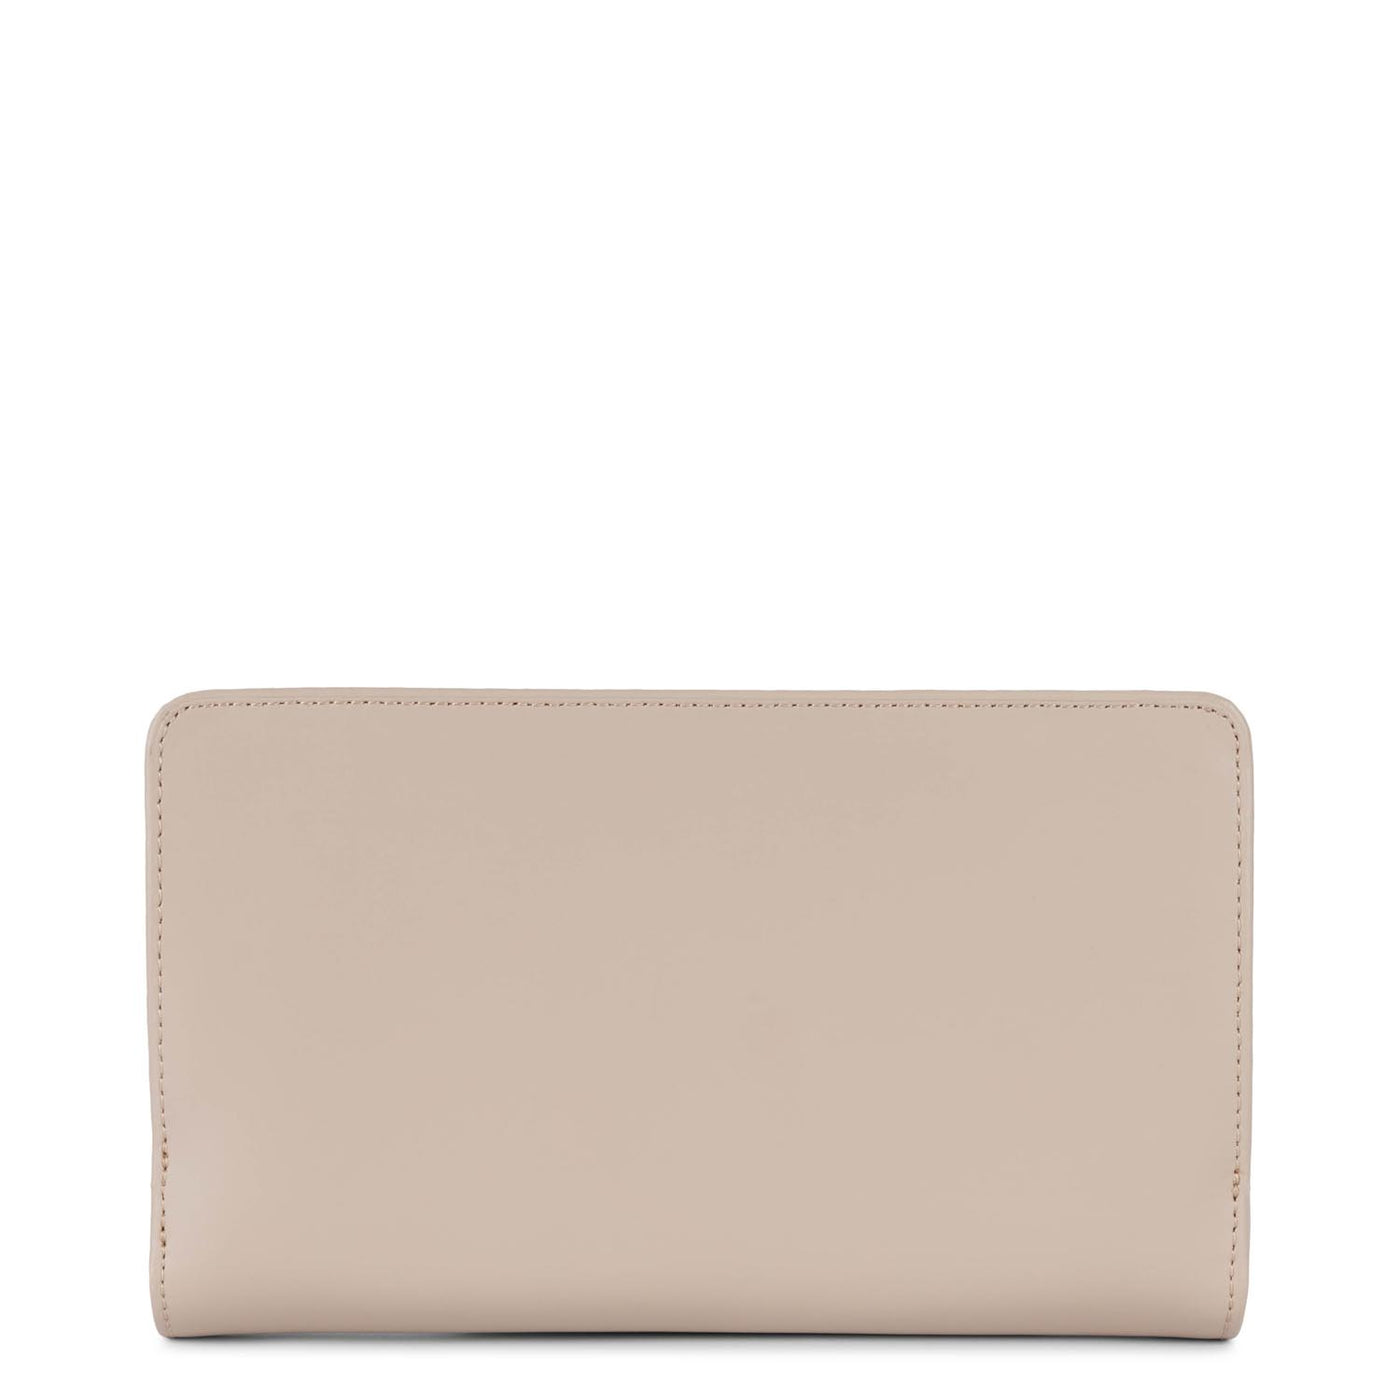 back to back organizer wallet - smooth #couleur_galet-ros-ecru-passion